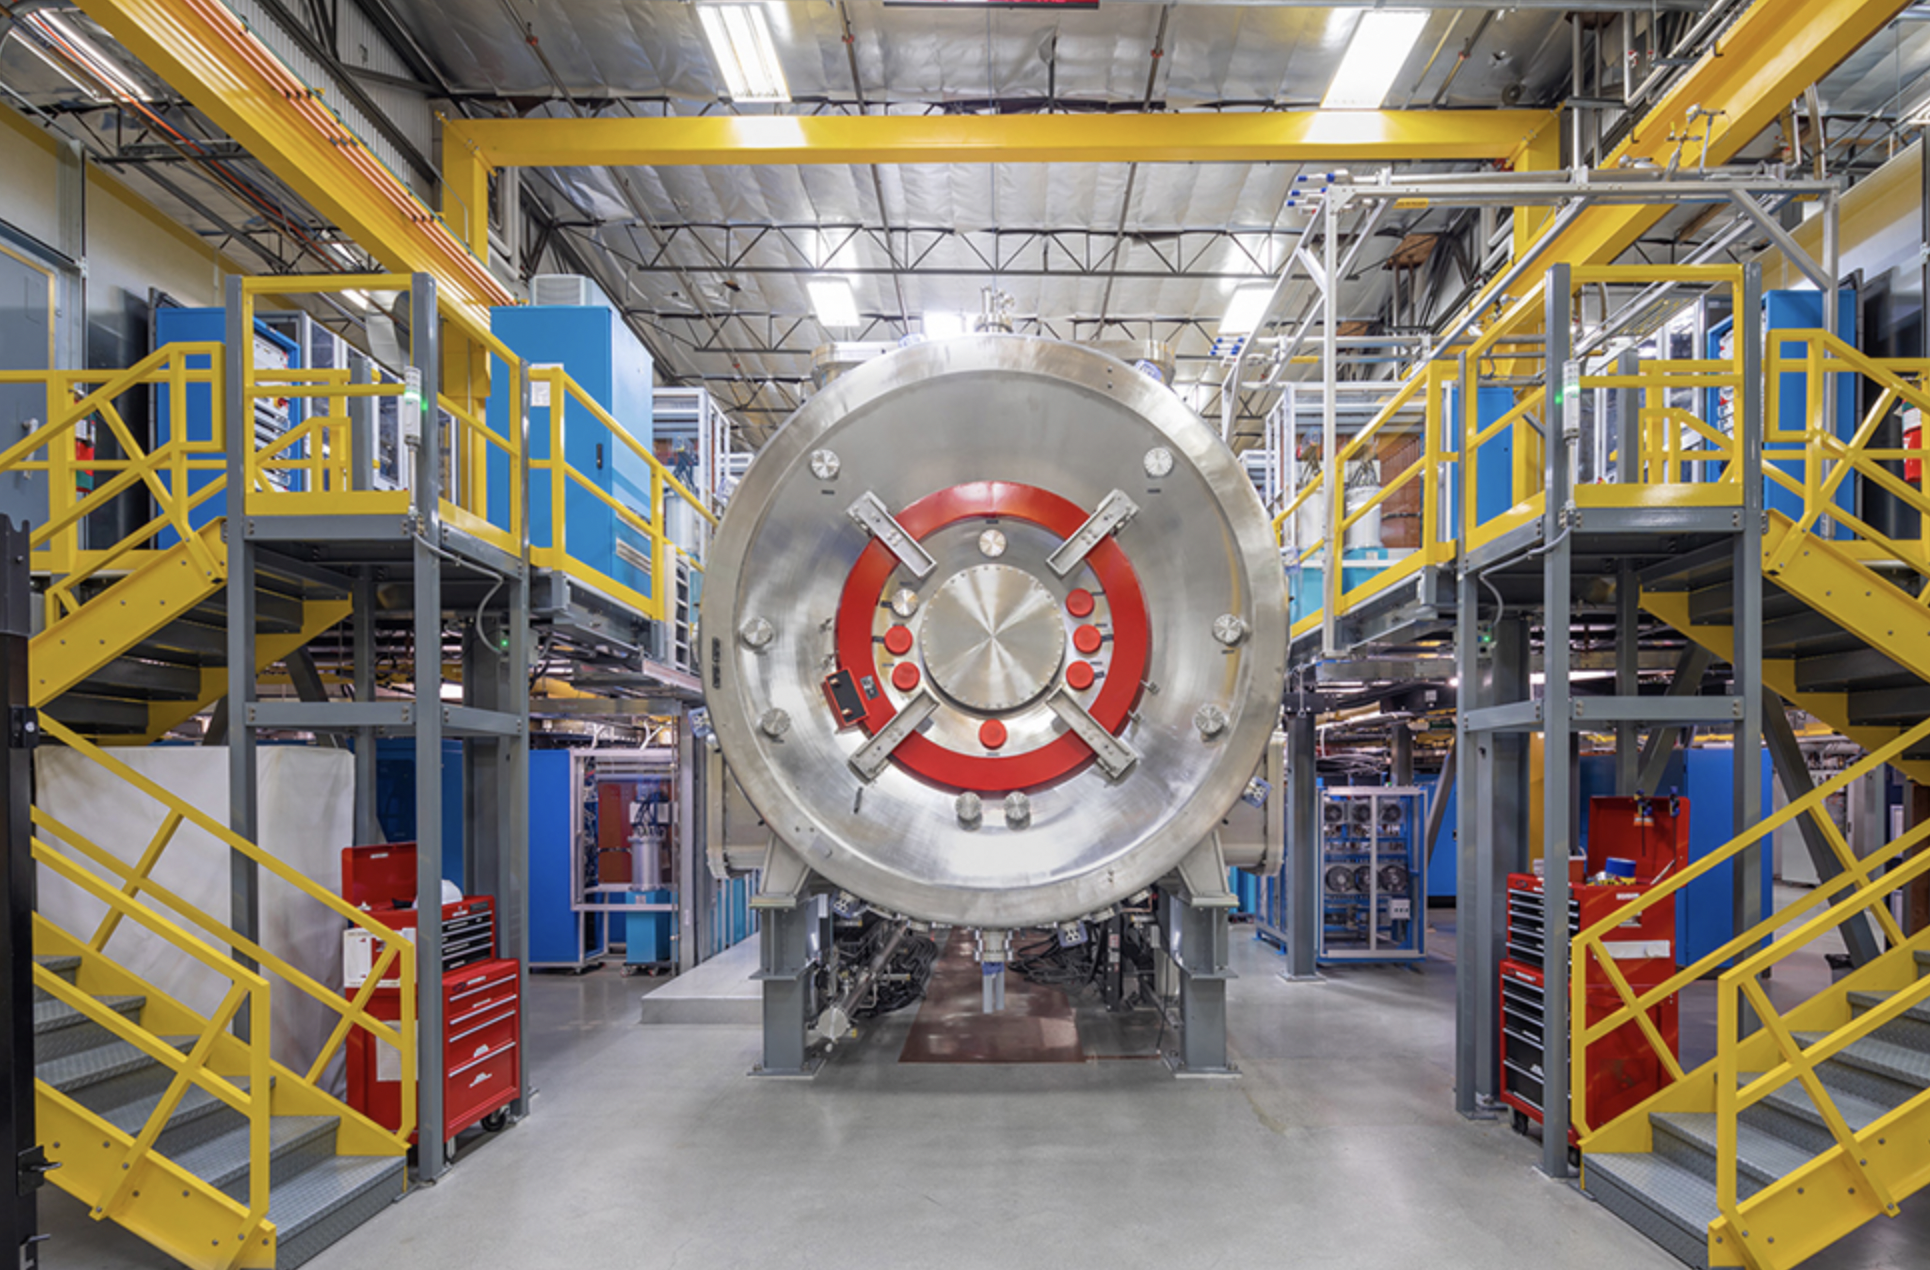 Copernicus is nearing completion.  A new round of financing for the TAE reactor